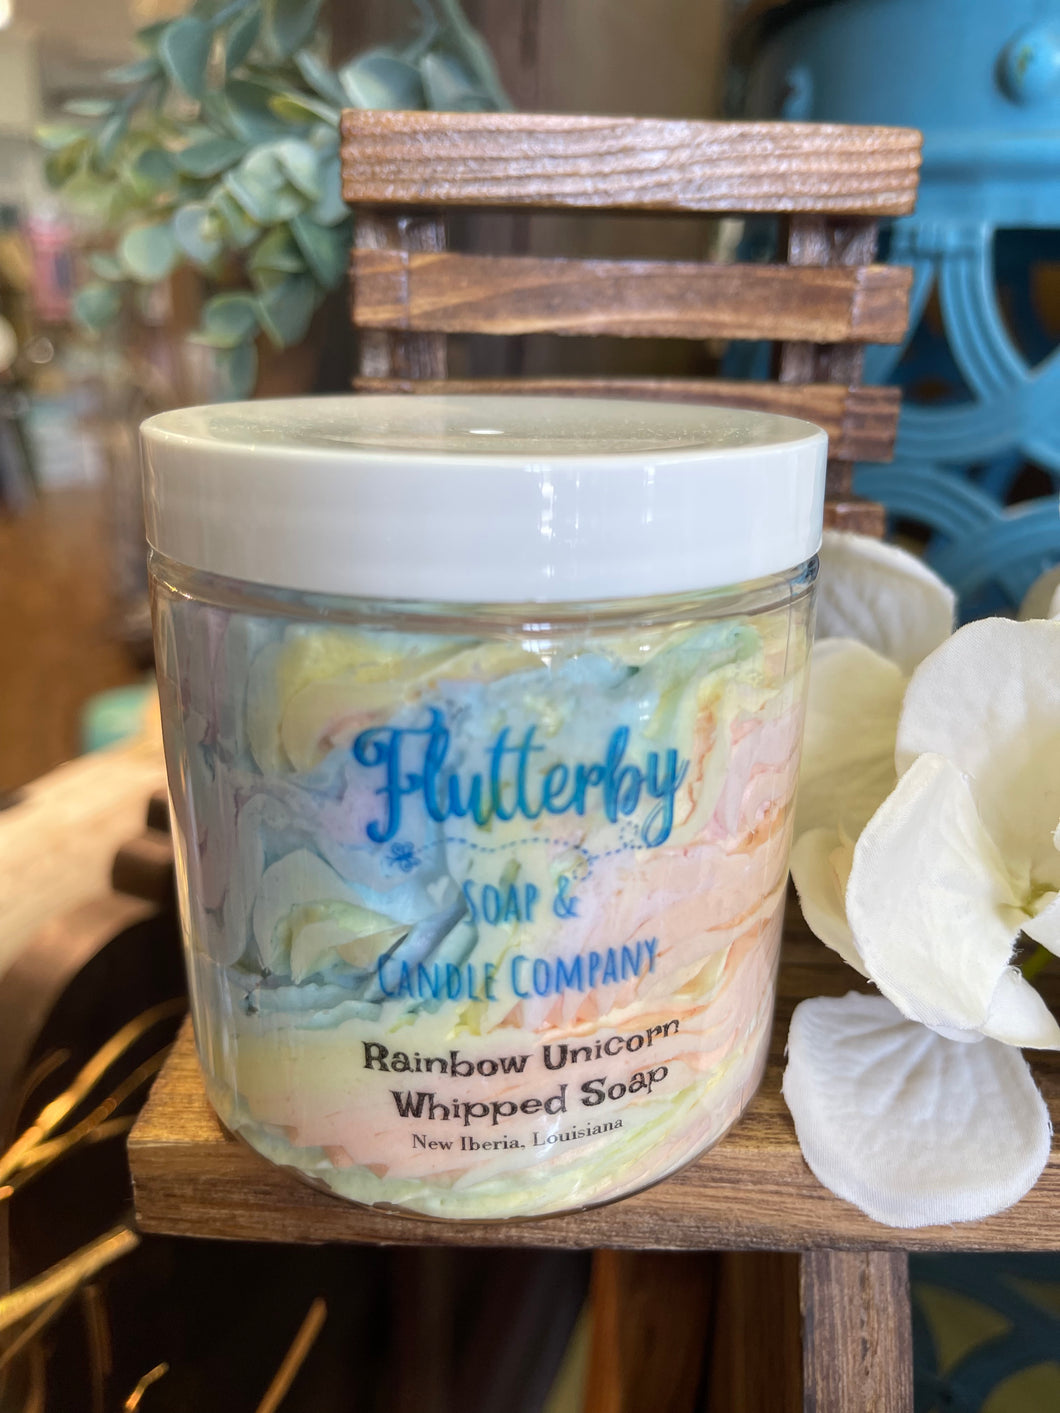 Flutterby Rainbow Unicorn Whipped Soap